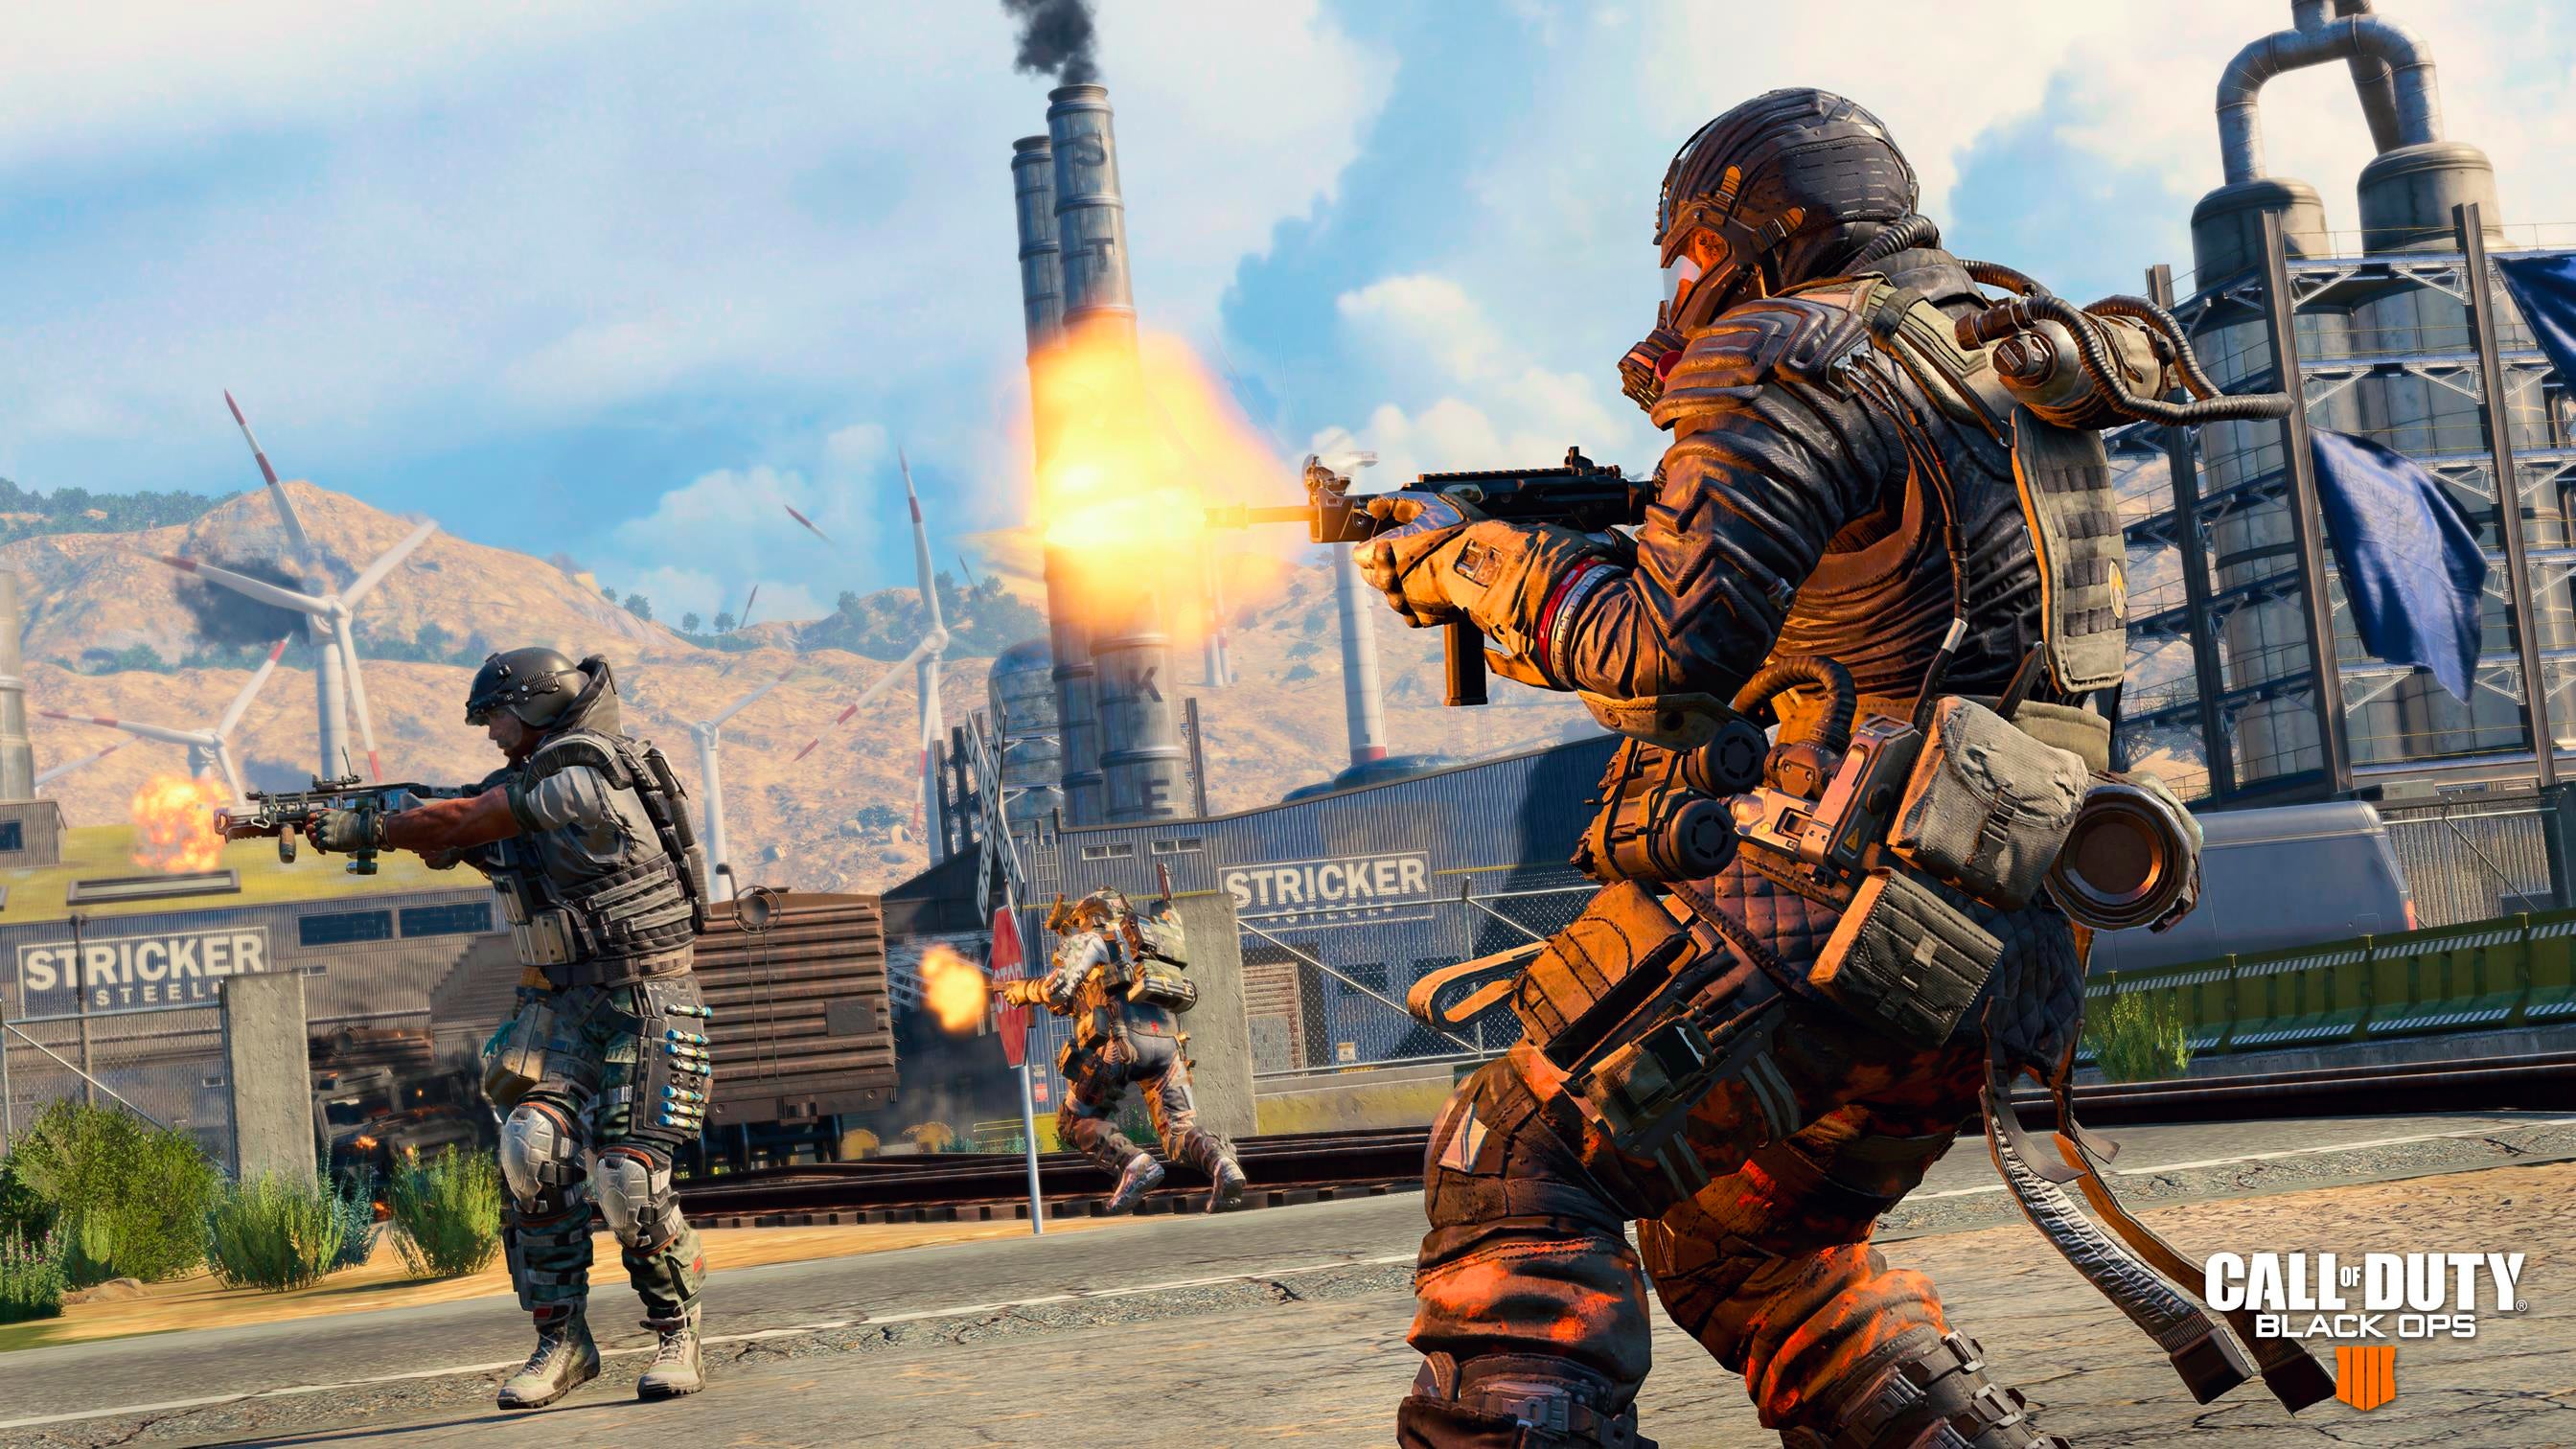 Image for Call of Duty: Black Ops 4 was Activision's biggest digital launch ever